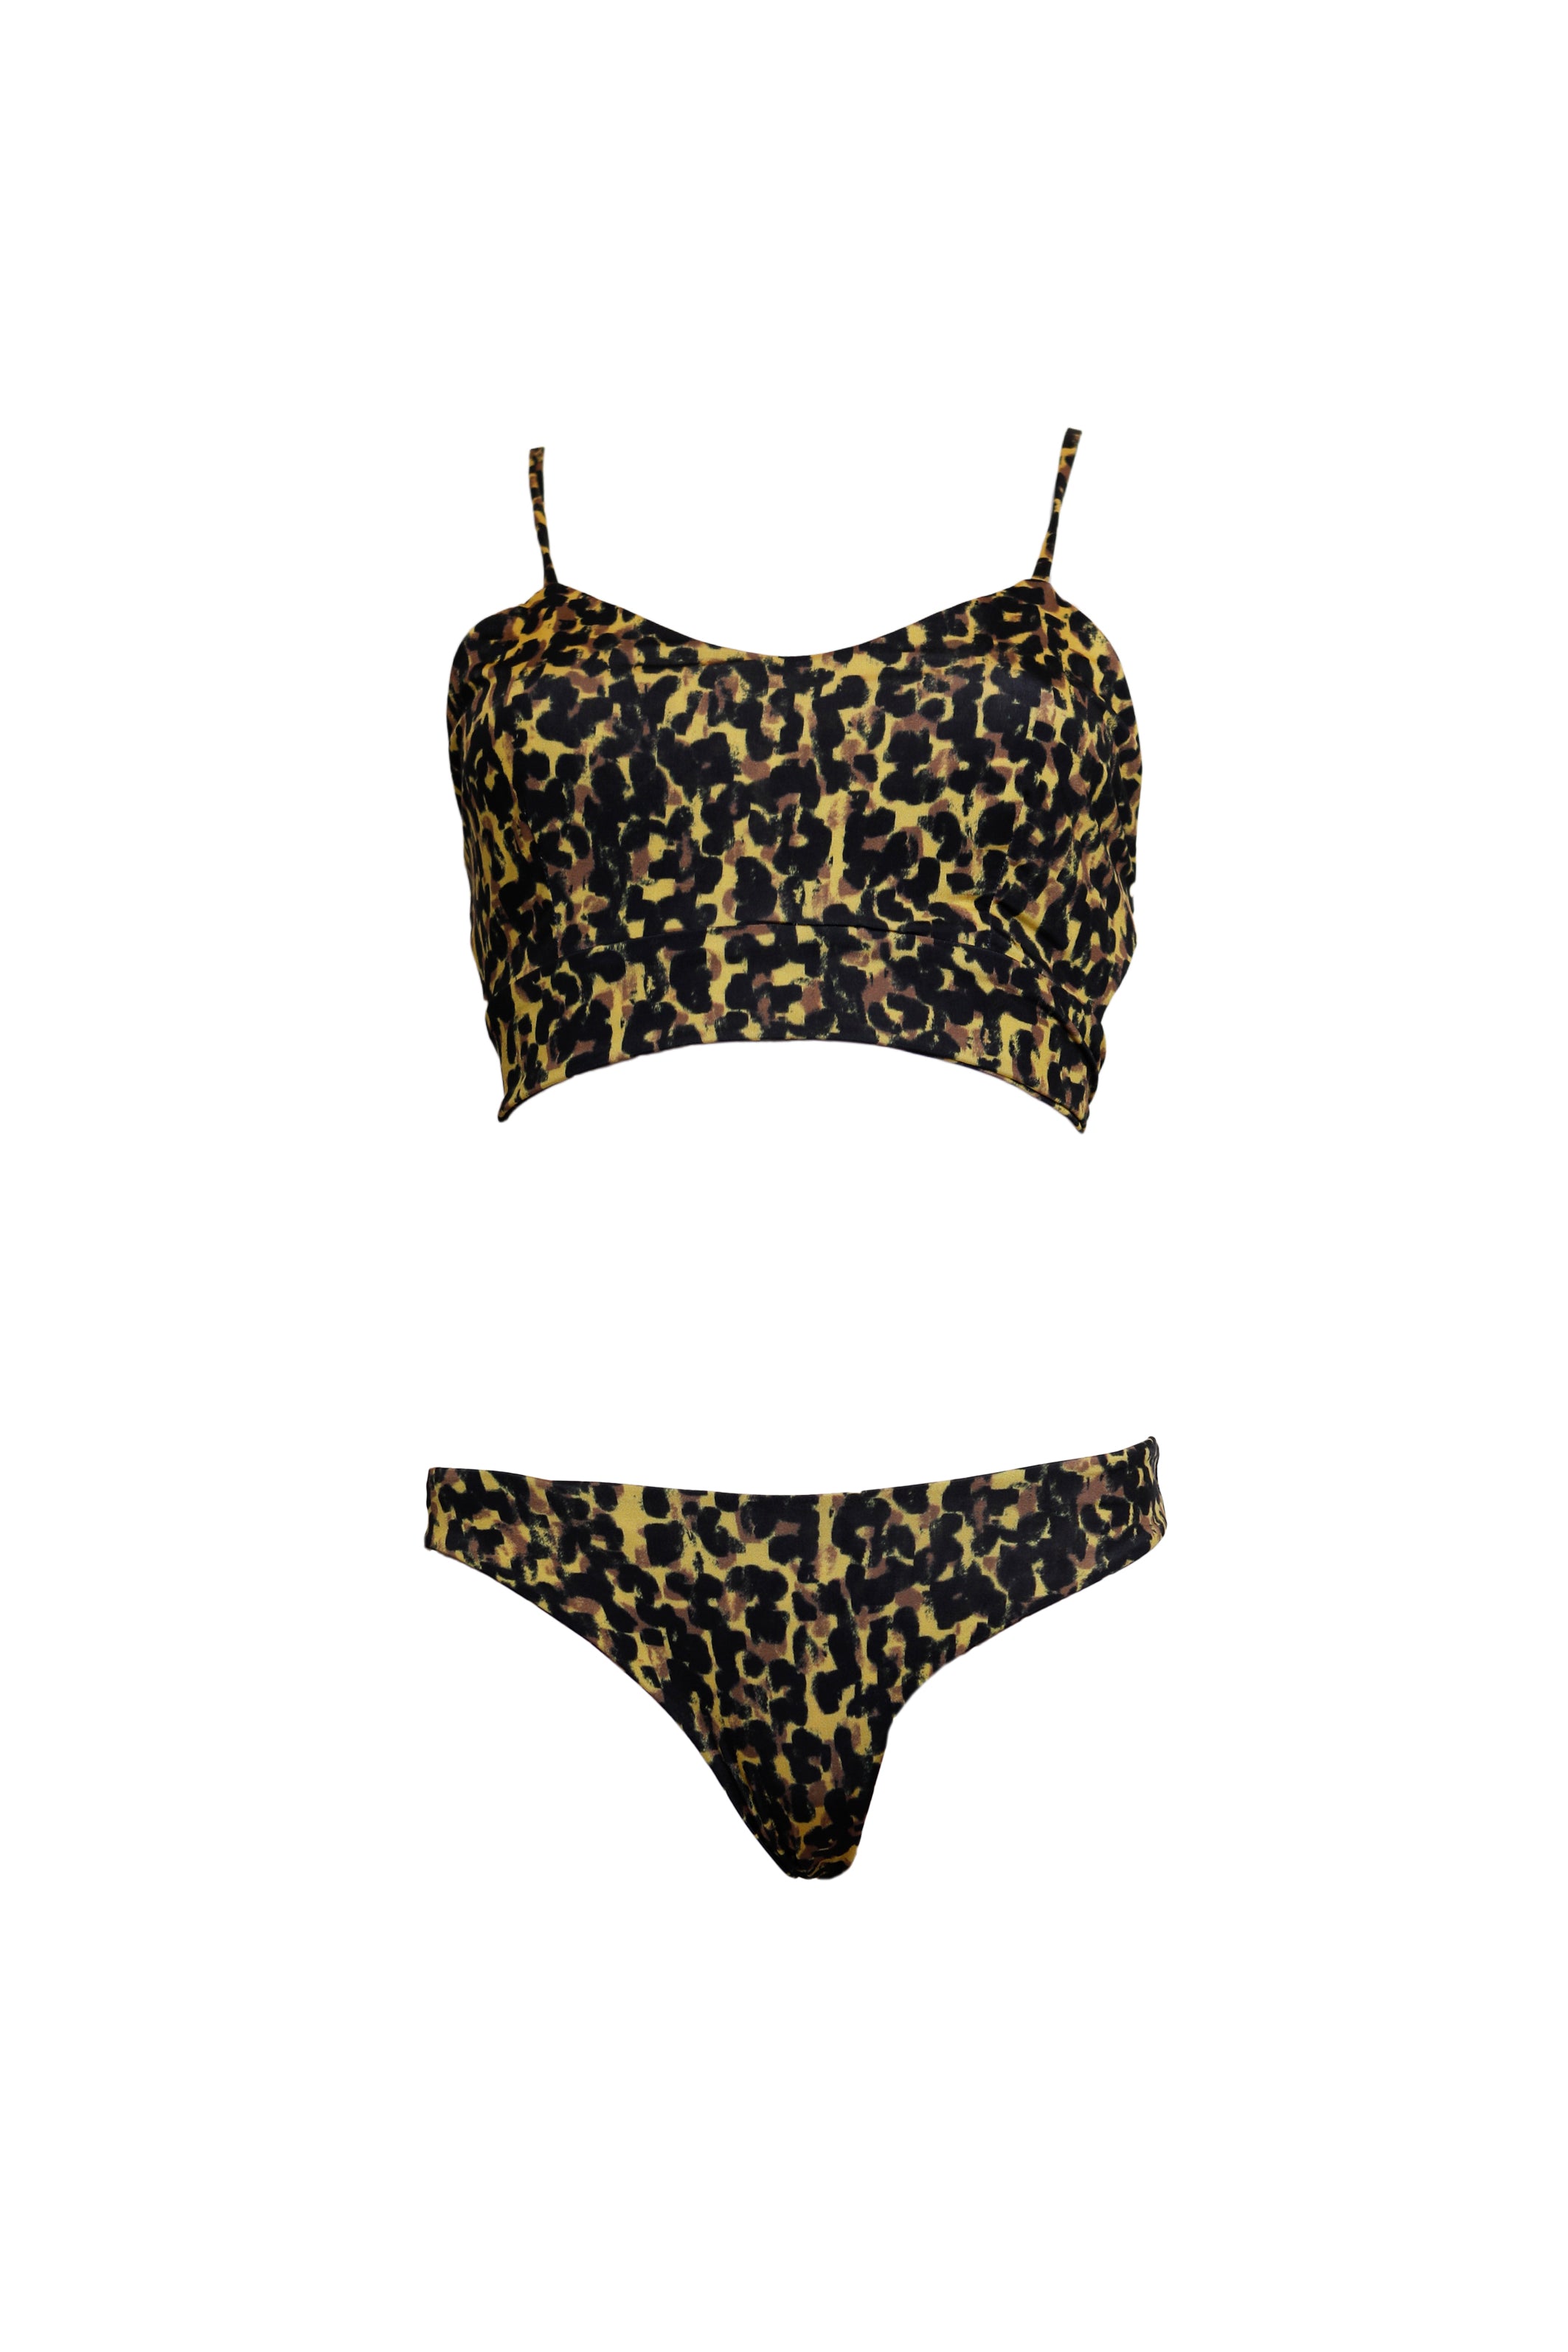 CECILIA - two-piece swimsuit in yellow animal print lycra